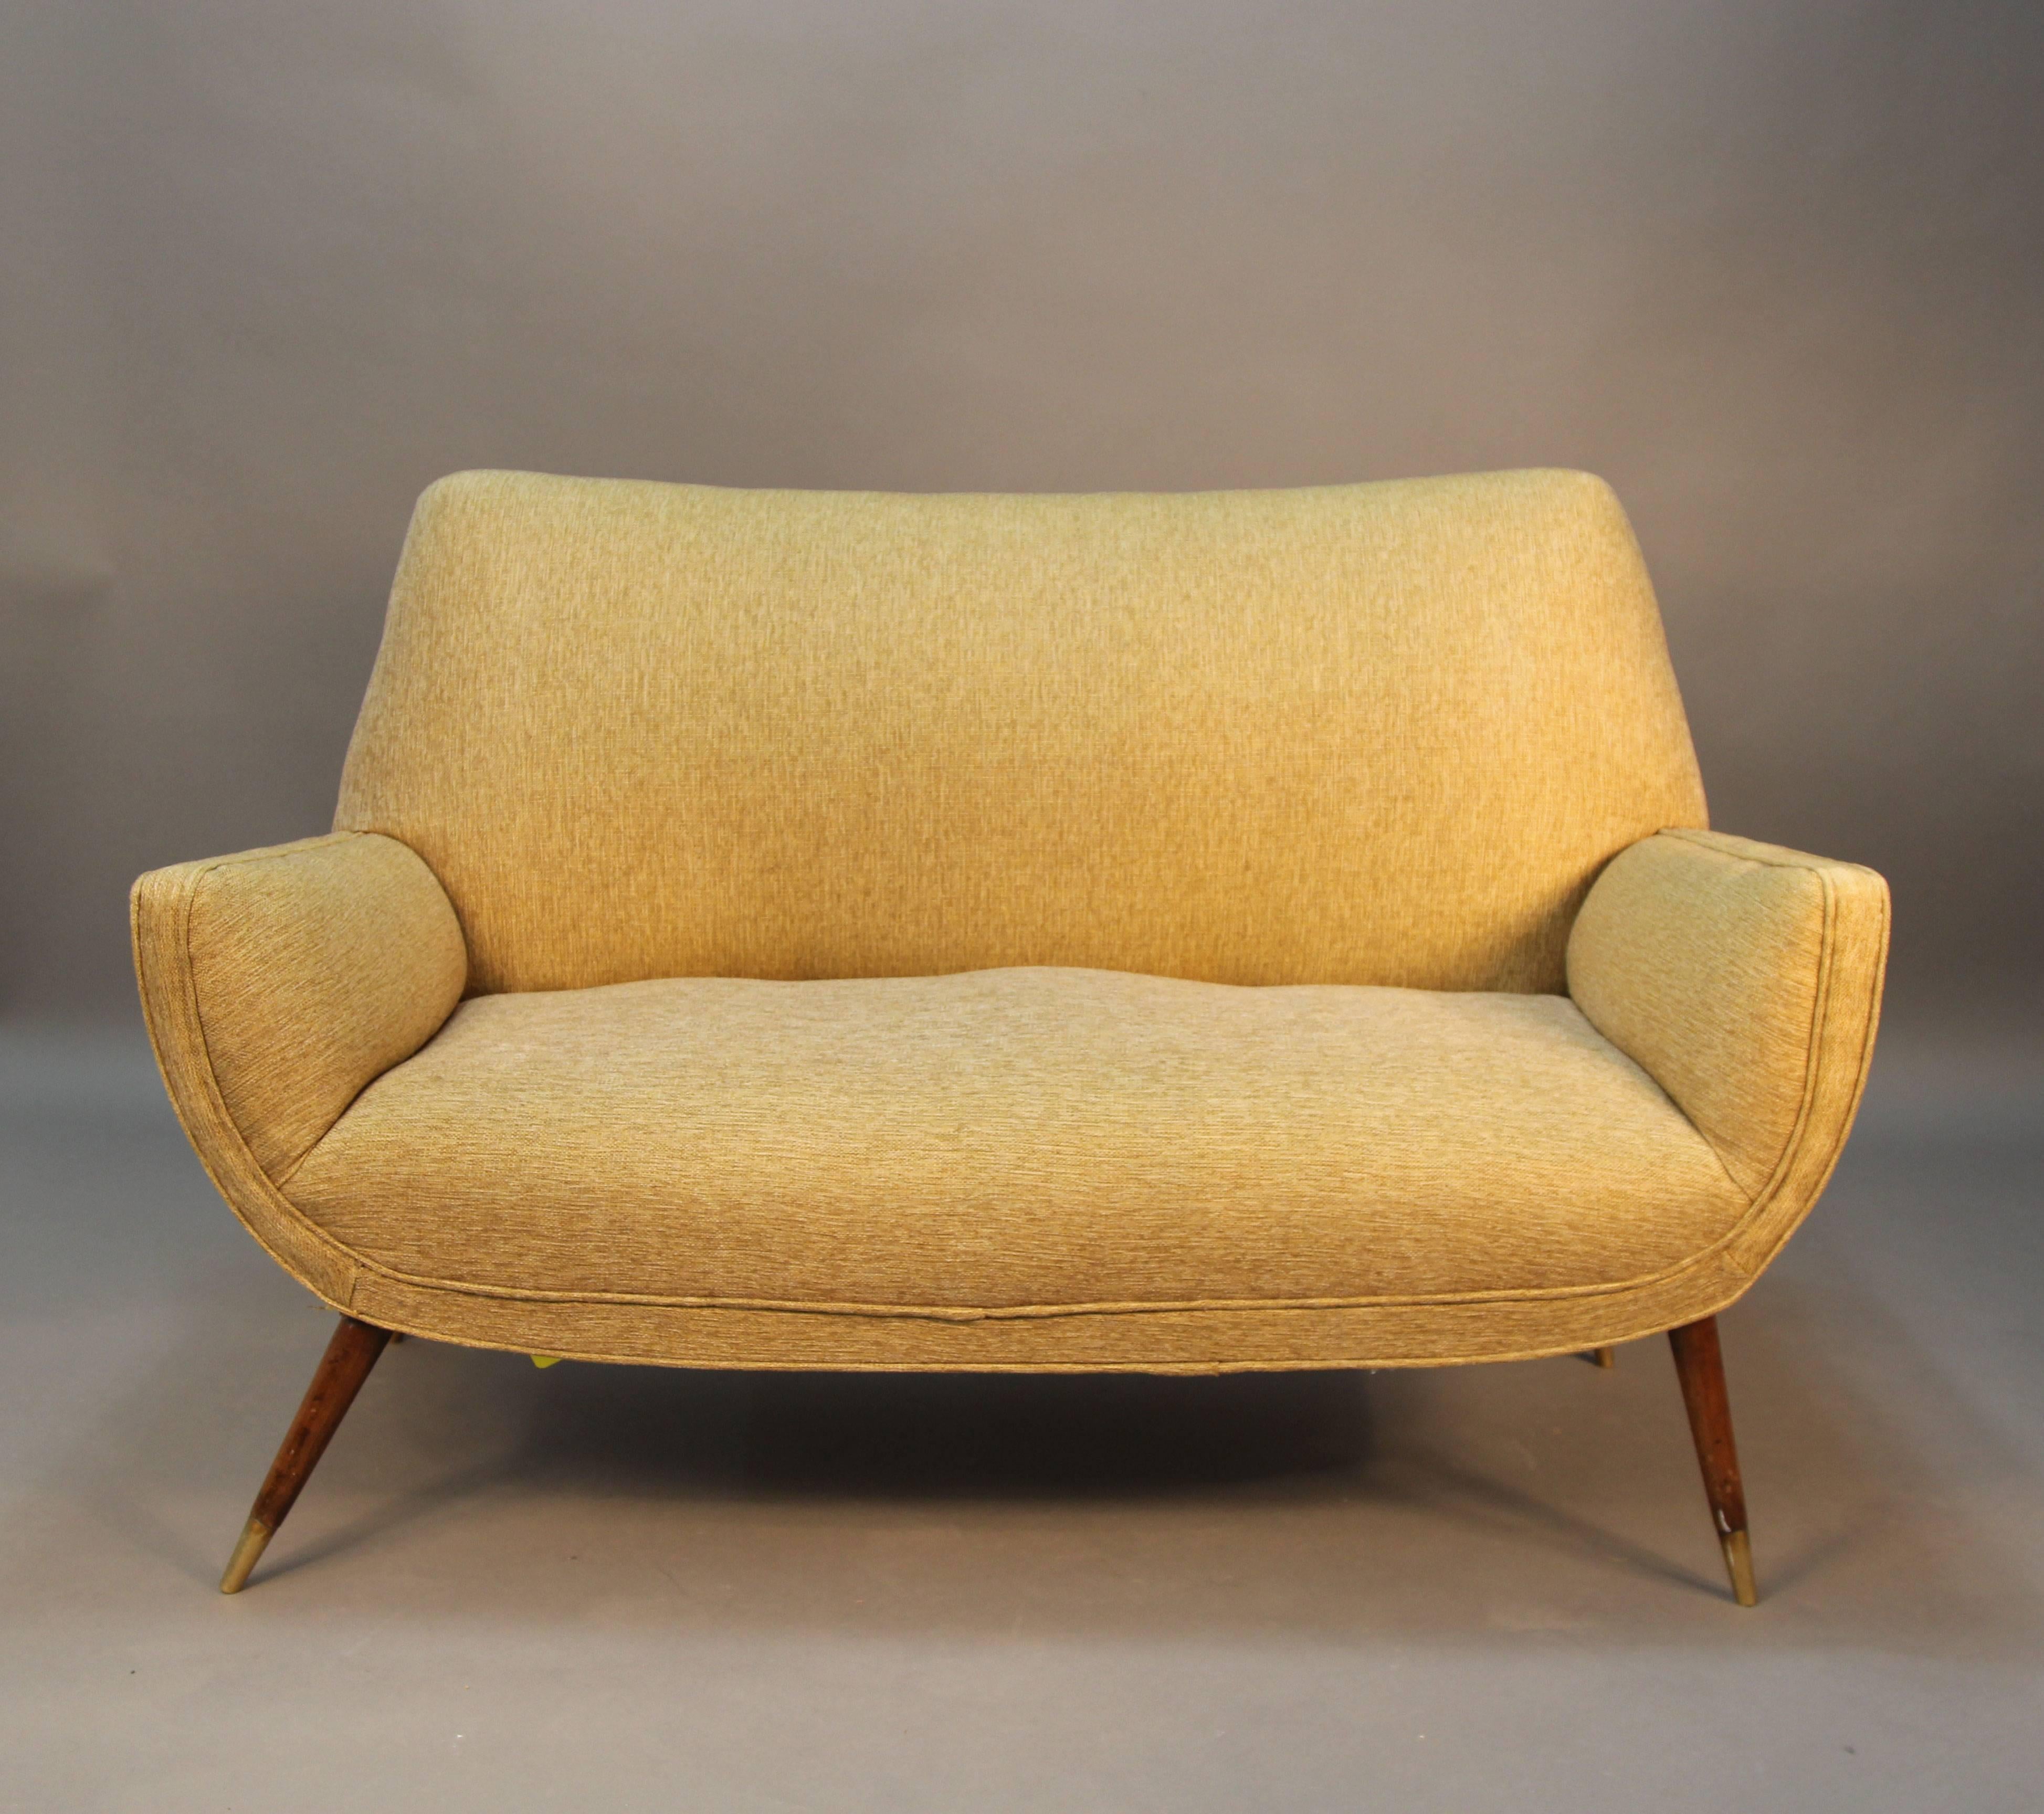 1950s Modern upholstered loveseat with walnut flared legs and brass sabots.